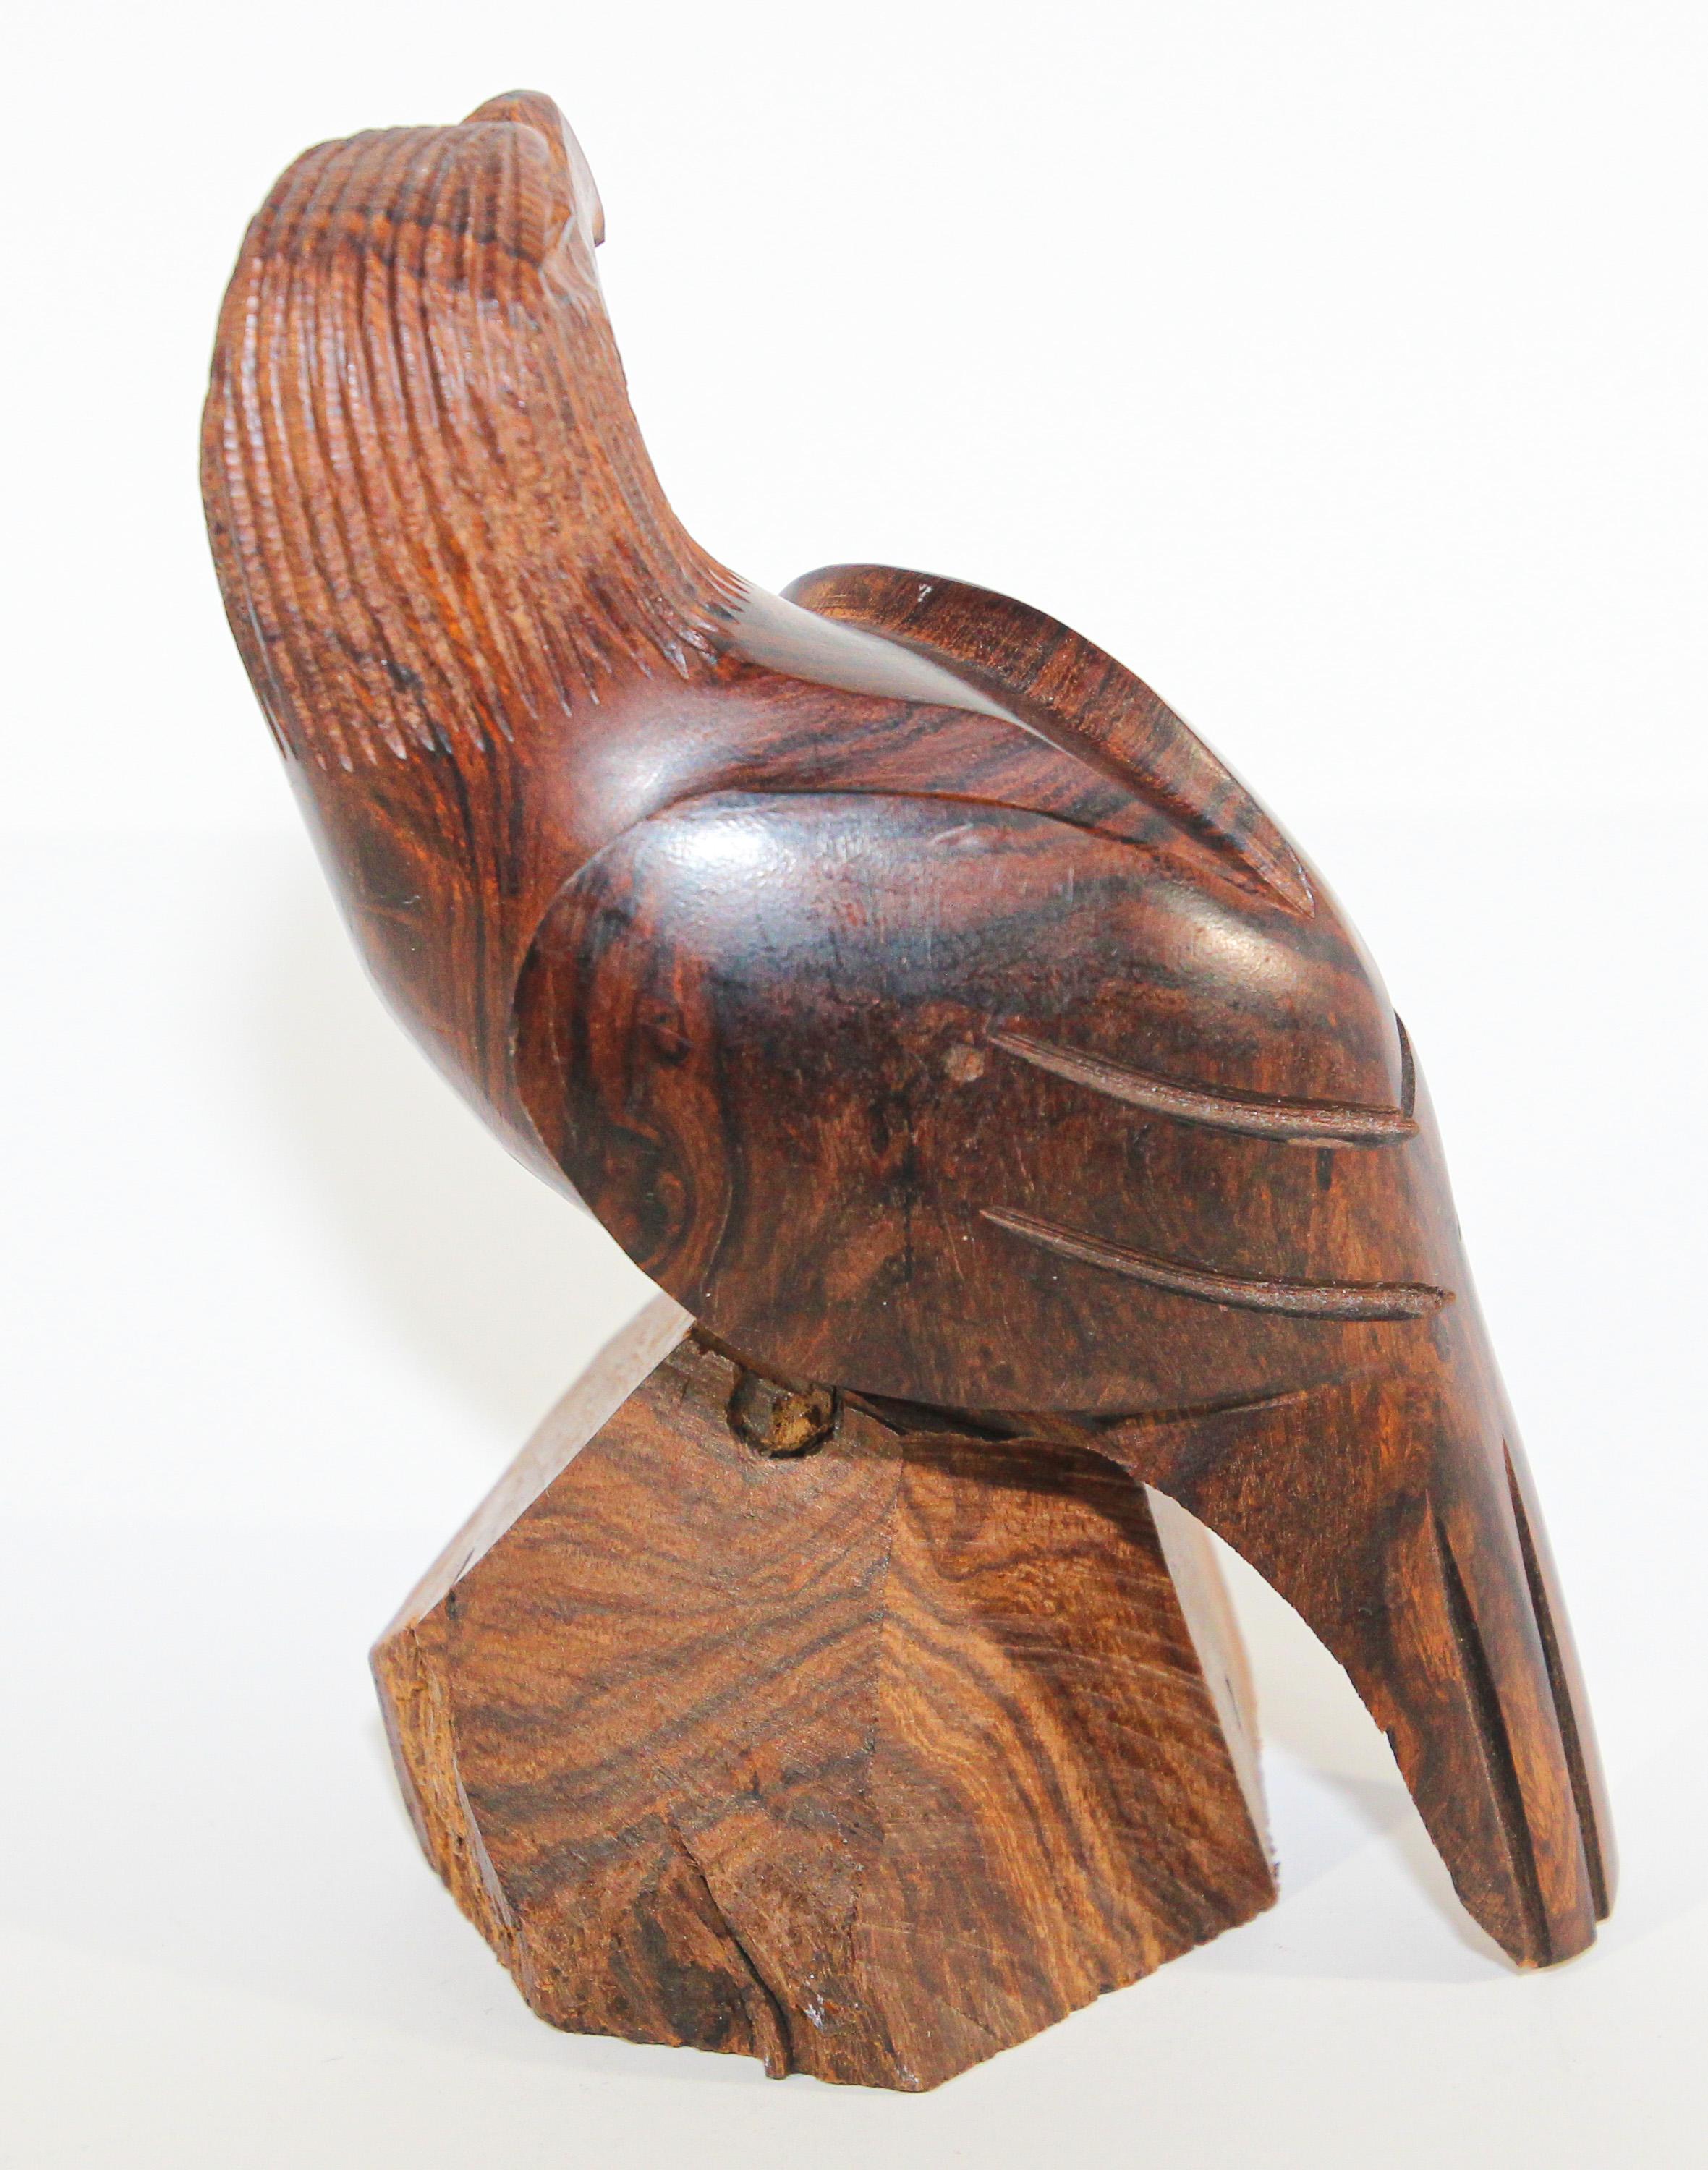 ironwood sculptures for sale